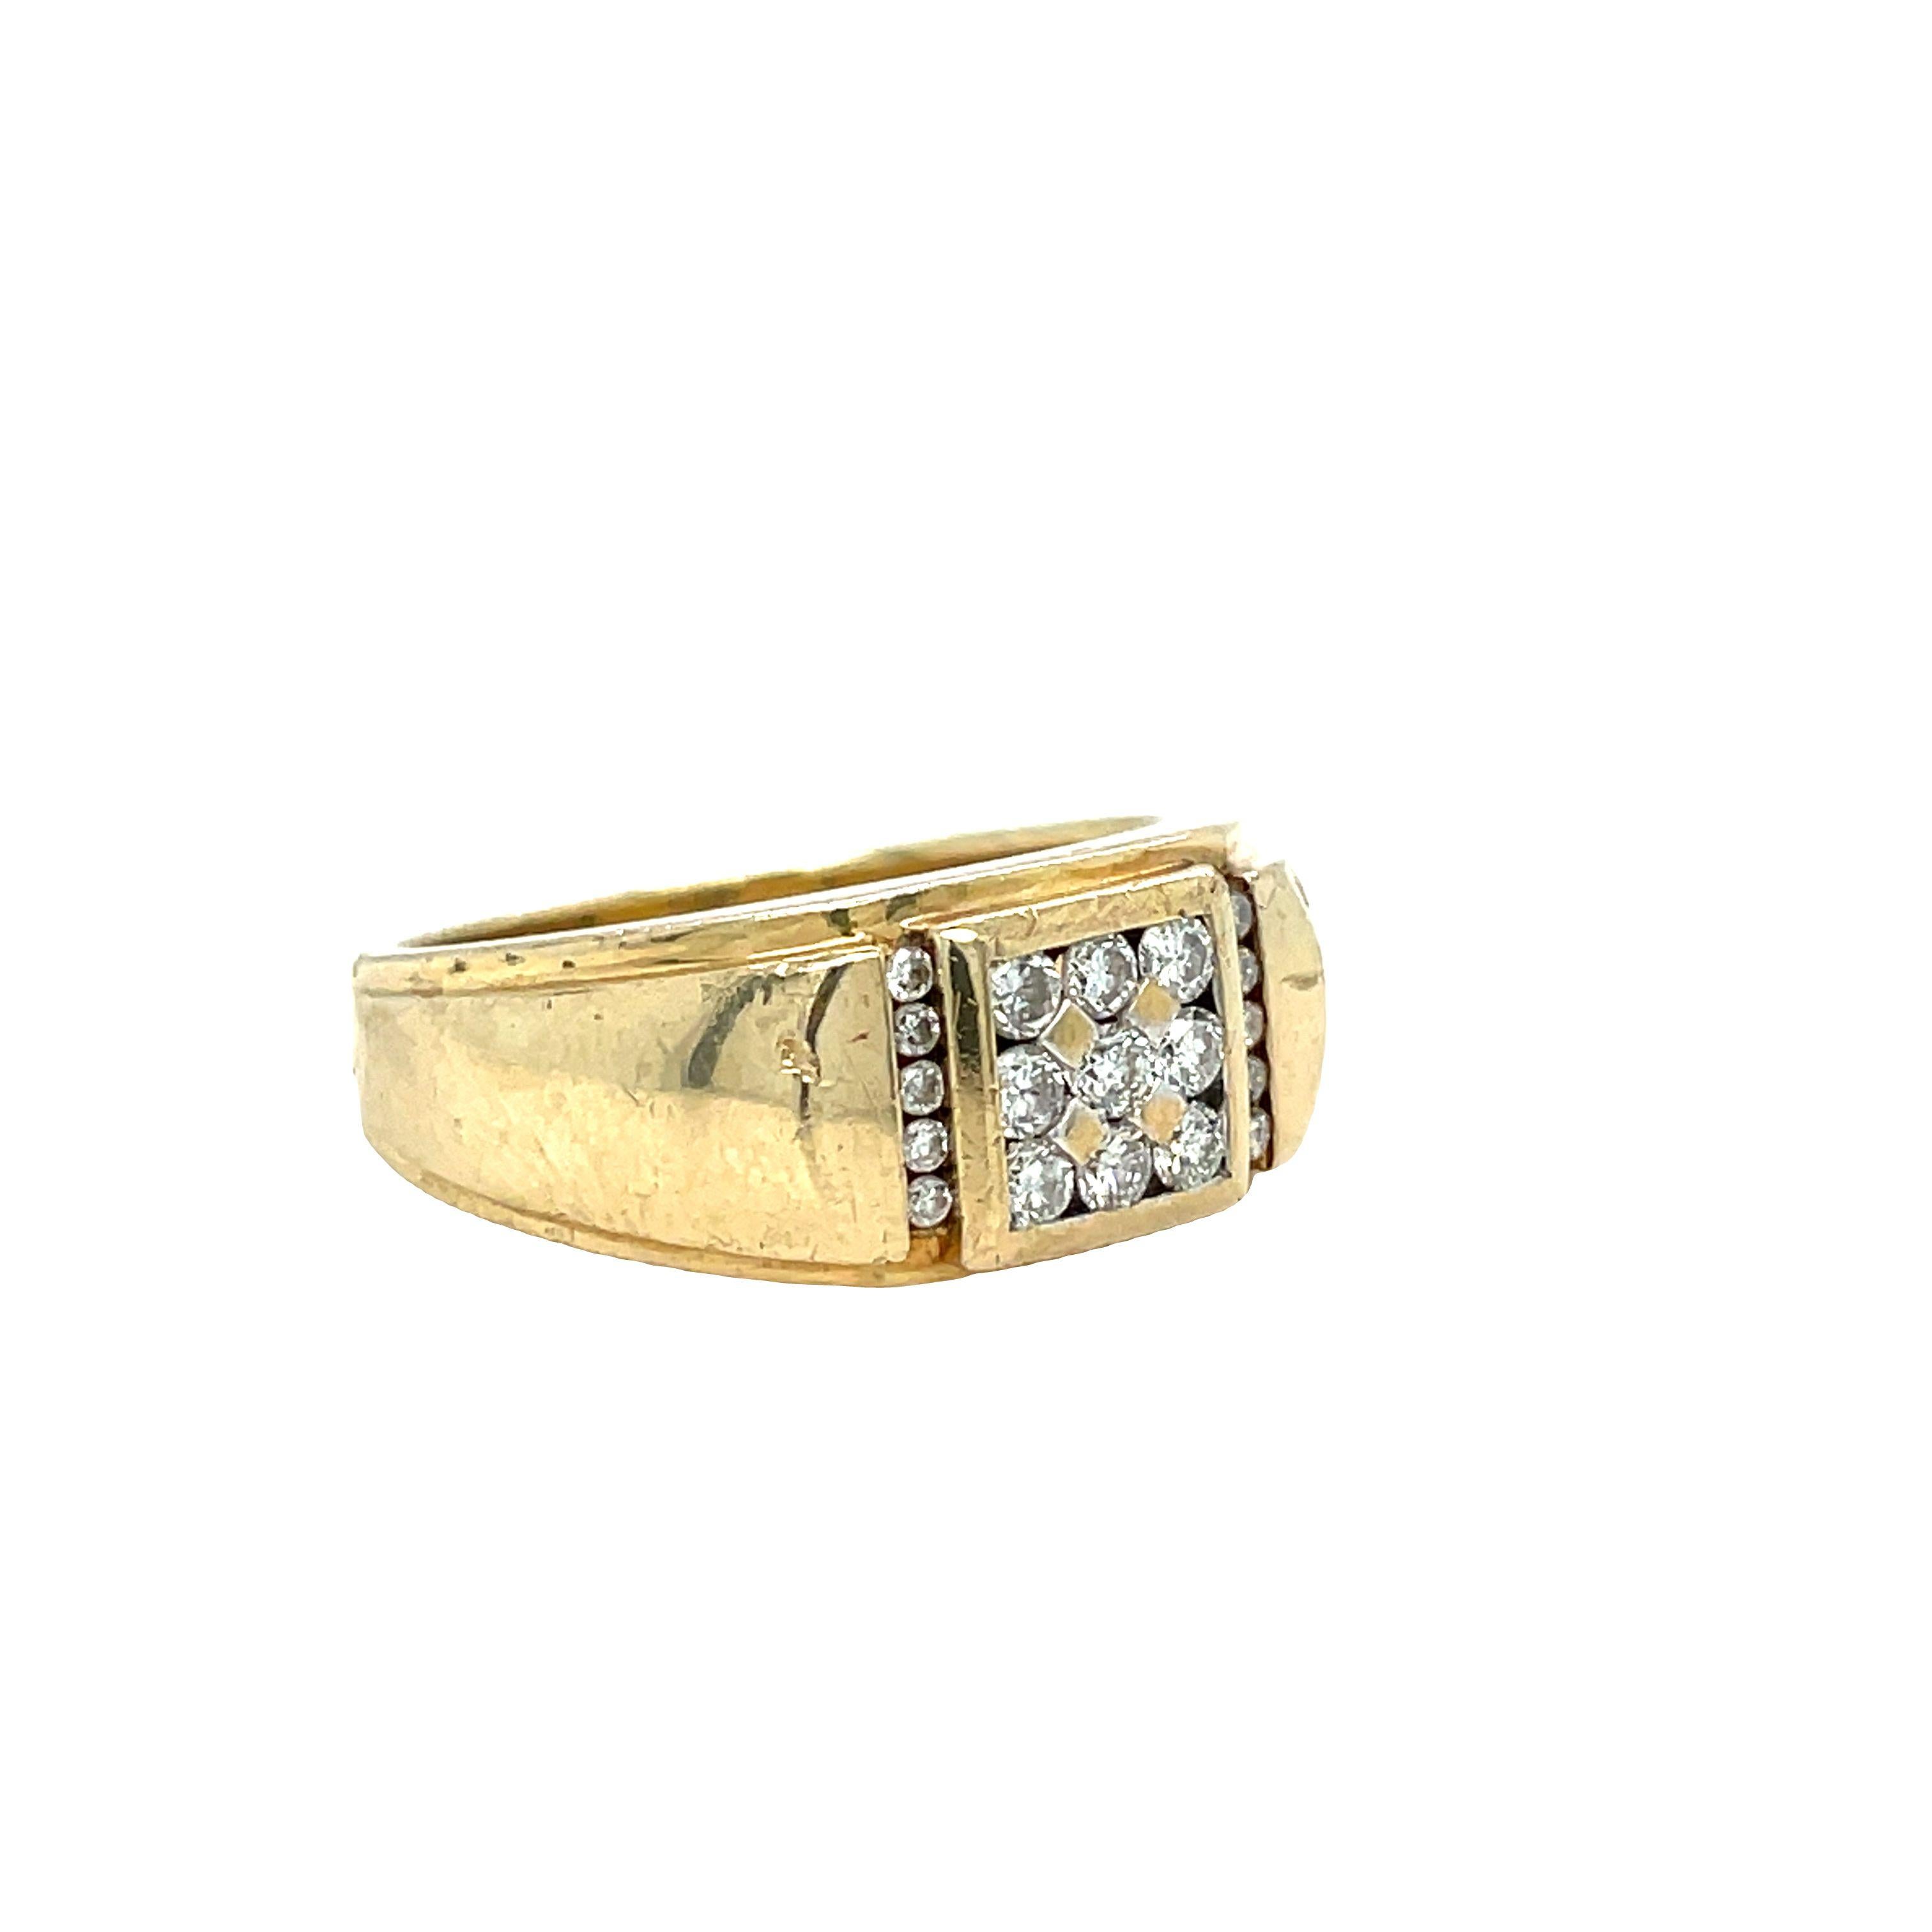 This Vintage 14K Yellow Gold Men's Ring is crafted with elegance, it showcases nineteen round brilliant cut diamonds weighing approximately 0.55 carat total weight. The center of the ring has shared prongs nine dazzling round brilliant cut diamonds,